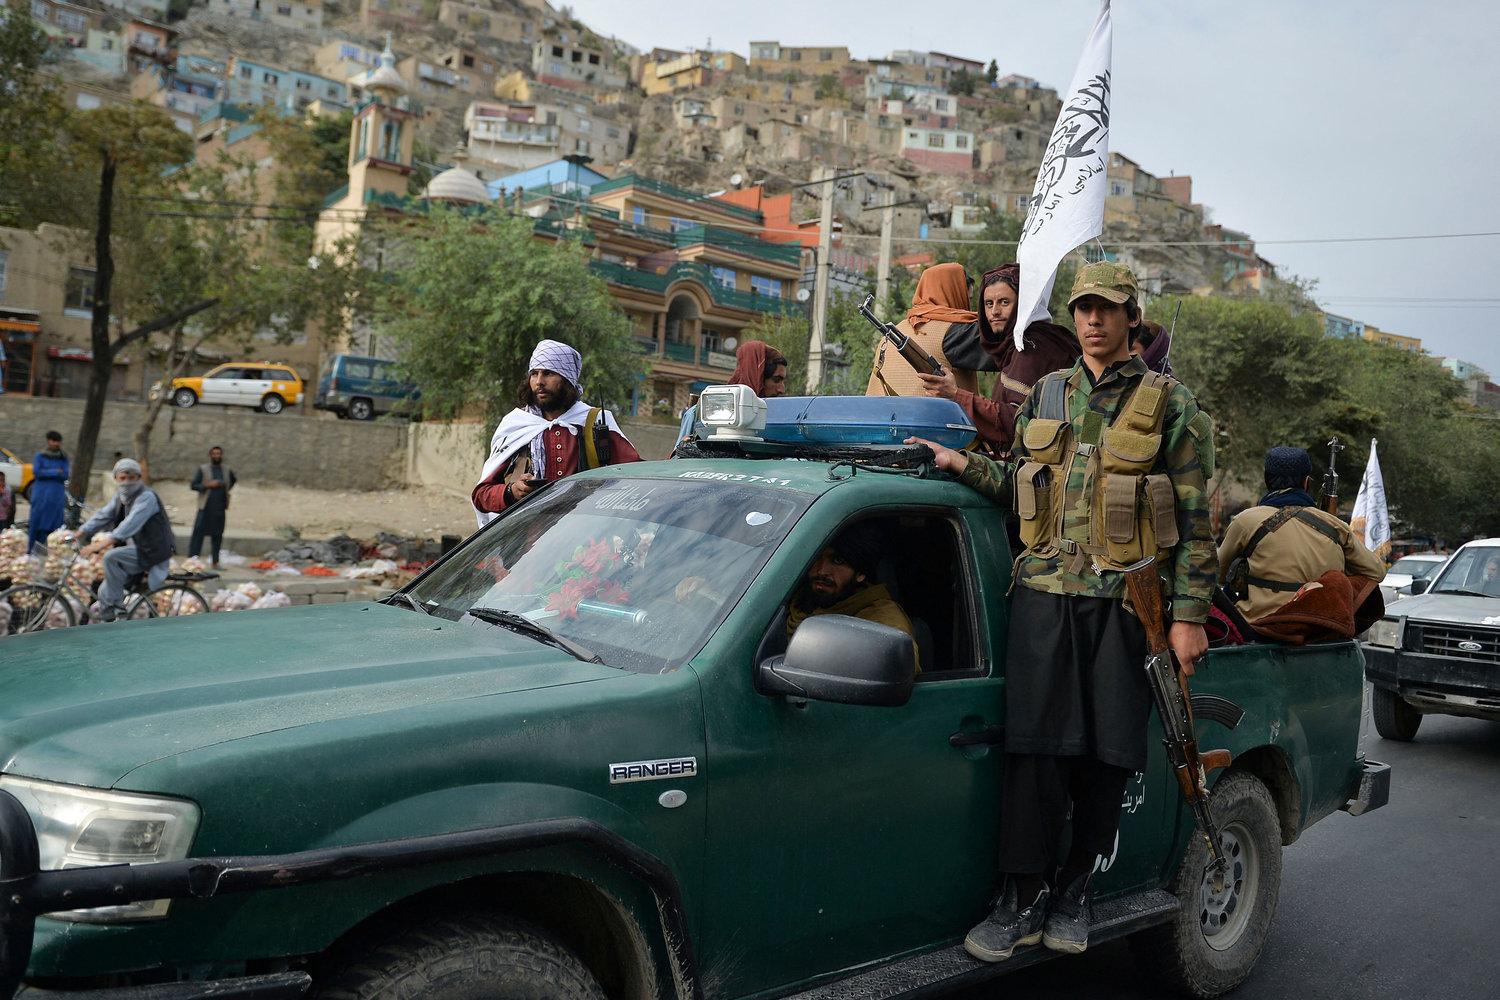 Taliban fighters on a pick-up vehicle take part in a rally in Kabul on August 31, 2021 as they celebrate after the U.S. pulled all its troops out of the country to end a brutal 20-year war -- one that started and ended with the hardline Islamists in power. (Hoshang Hashimi/AFP/Getty Images/TNS)